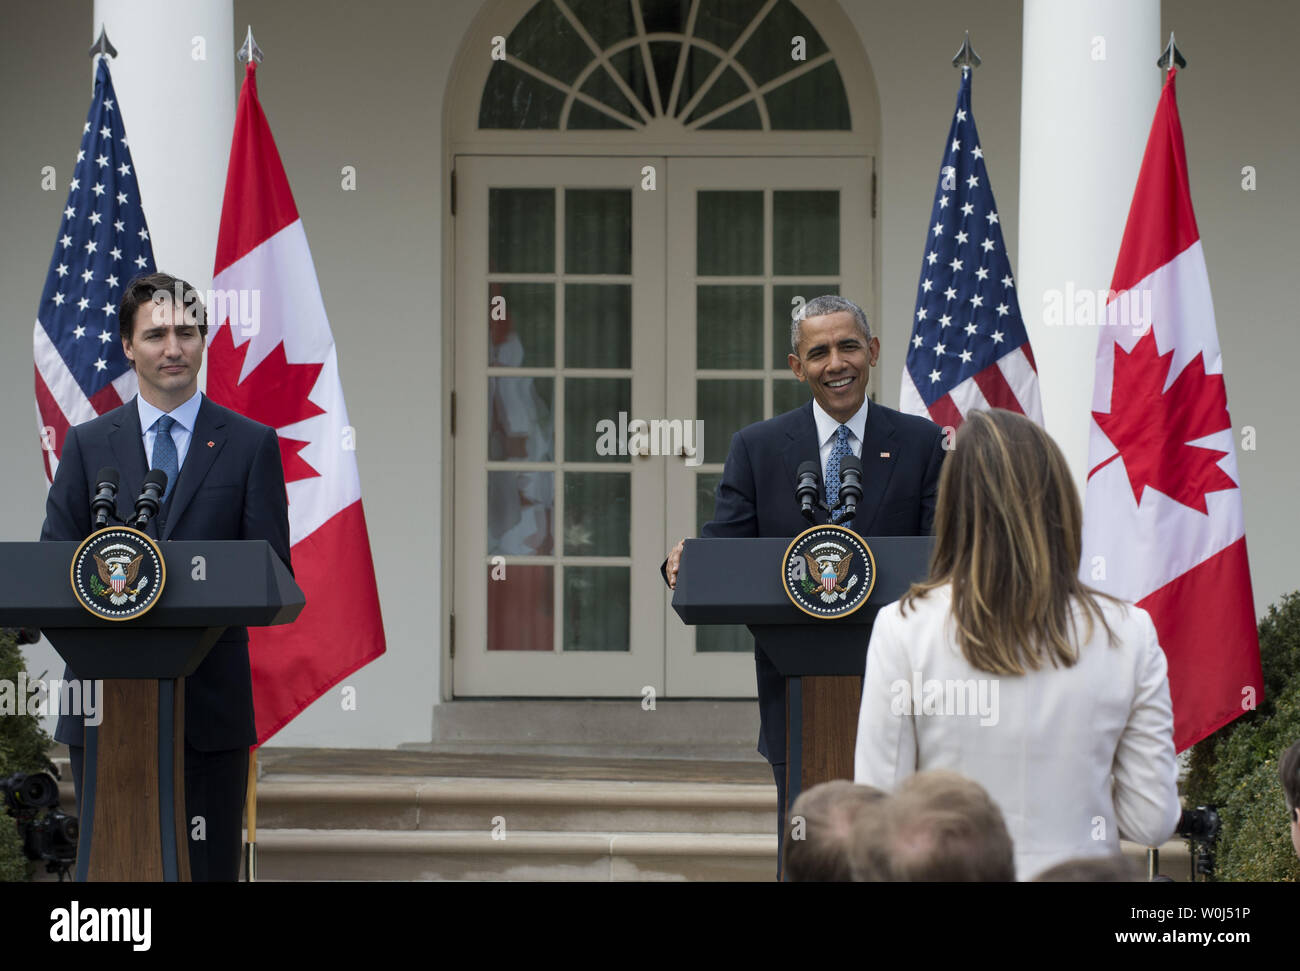 U.S. President Barack Obama and Canadian Prime Minister Justin Trudeau listen to a question from an American reporter at a joint press conference in the Rose Garden during the State Visit of the Canadian PM at the White House in Washington, DC on March 10, 2016.  Obama was smiling since the question related to Americans leaving for Canada if their candidate does not win in November.      Photo by Pat Benic/UPI Stock Photo